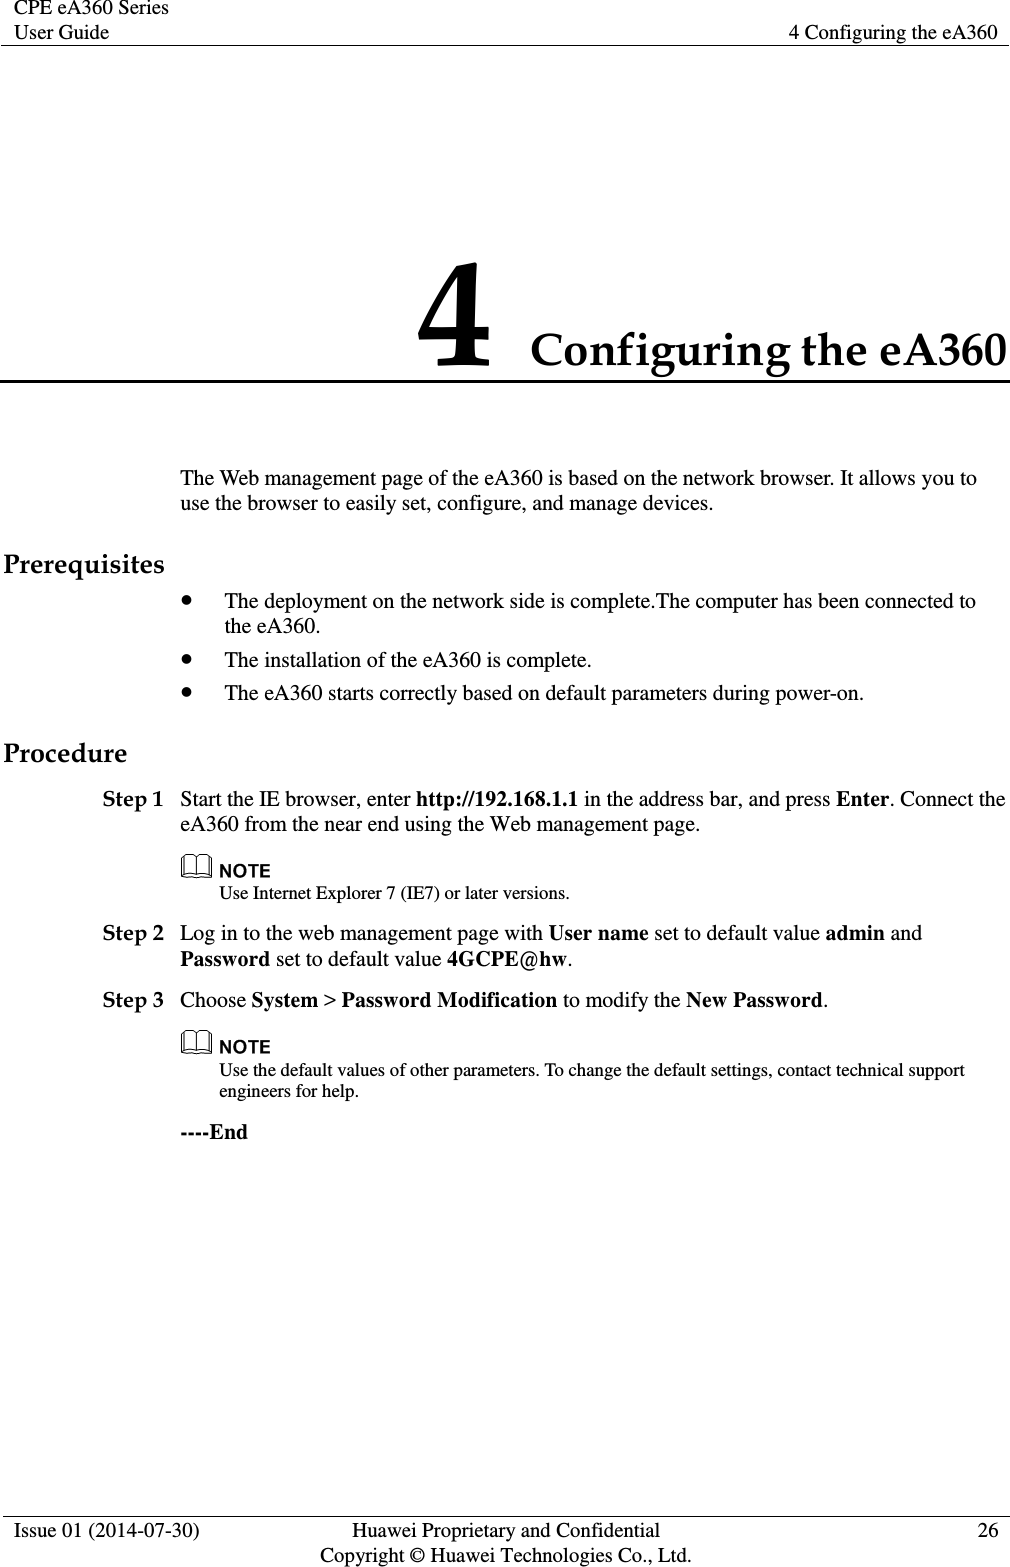 CPE eA360 Series User Guide 4 Configuring the eA360  Issue 01 (2014-07-30) Huawei Proprietary and Confidential                                     Copyright © Huawei Technologies Co., Ltd. 26  4 Configuring the eA360 The Web management page of the eA360 is based on the network browser. It allows you to use the browser to easily set, configure, and manage devices. Prerequisites  The deployment on the network side is complete.The computer has been connected to the eA360.  The installation of the eA360 is complete.  The eA360 starts correctly based on default parameters during power-on. Procedure Step 1 Start the IE browser, enter http://192.168.1.1 in the address bar, and press Enter. Connect the eA360 from the near end using the Web management page.  Use Internet Explorer 7 (IE7) or later versions. Step 2 Log in to the web management page with User name set to default value admin and Password set to default value 4GCPE@hw. Step 3 Choose System &gt; Password Modification to modify the New Password.  Use the default values of other parameters. To change the default settings, contact technical support engineers for help. ----End 